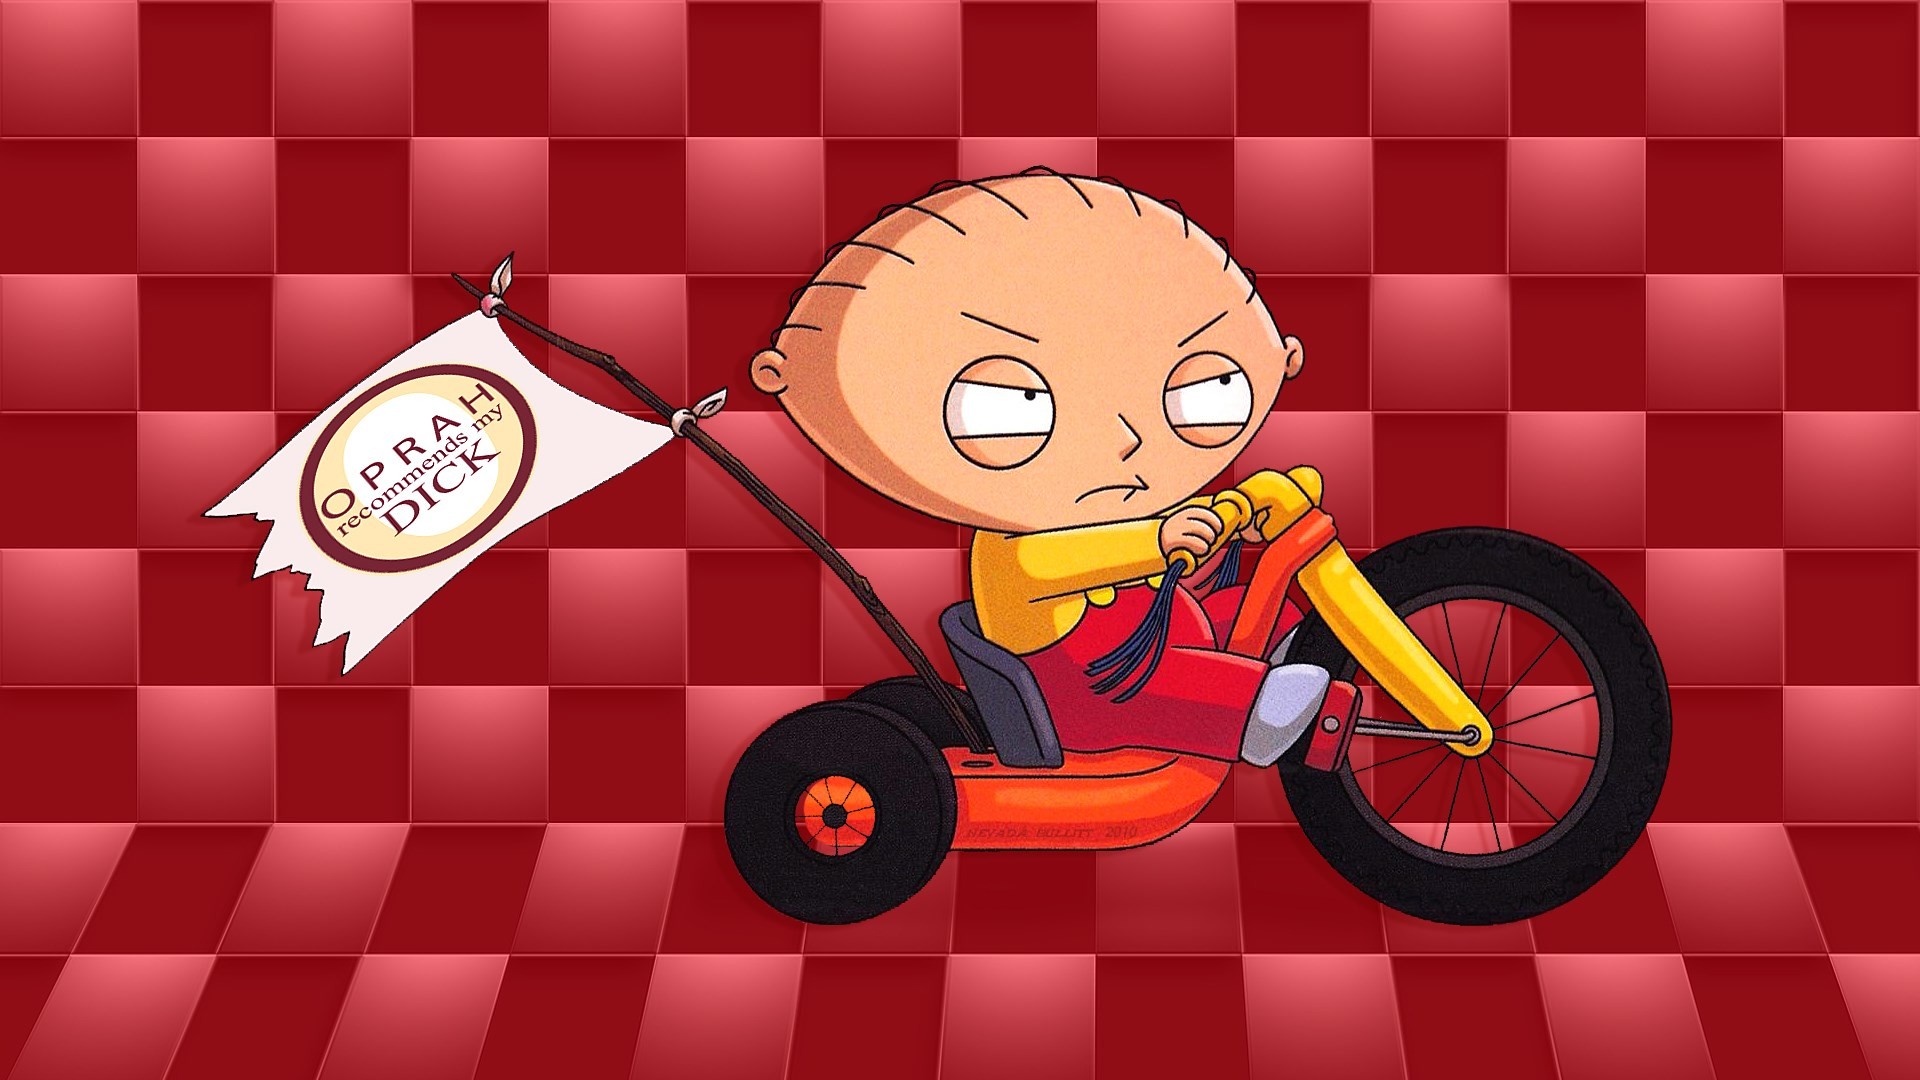 541617 family guy wallpaper desktop backgrounds free  Rare Gallery HD  Wallpapers